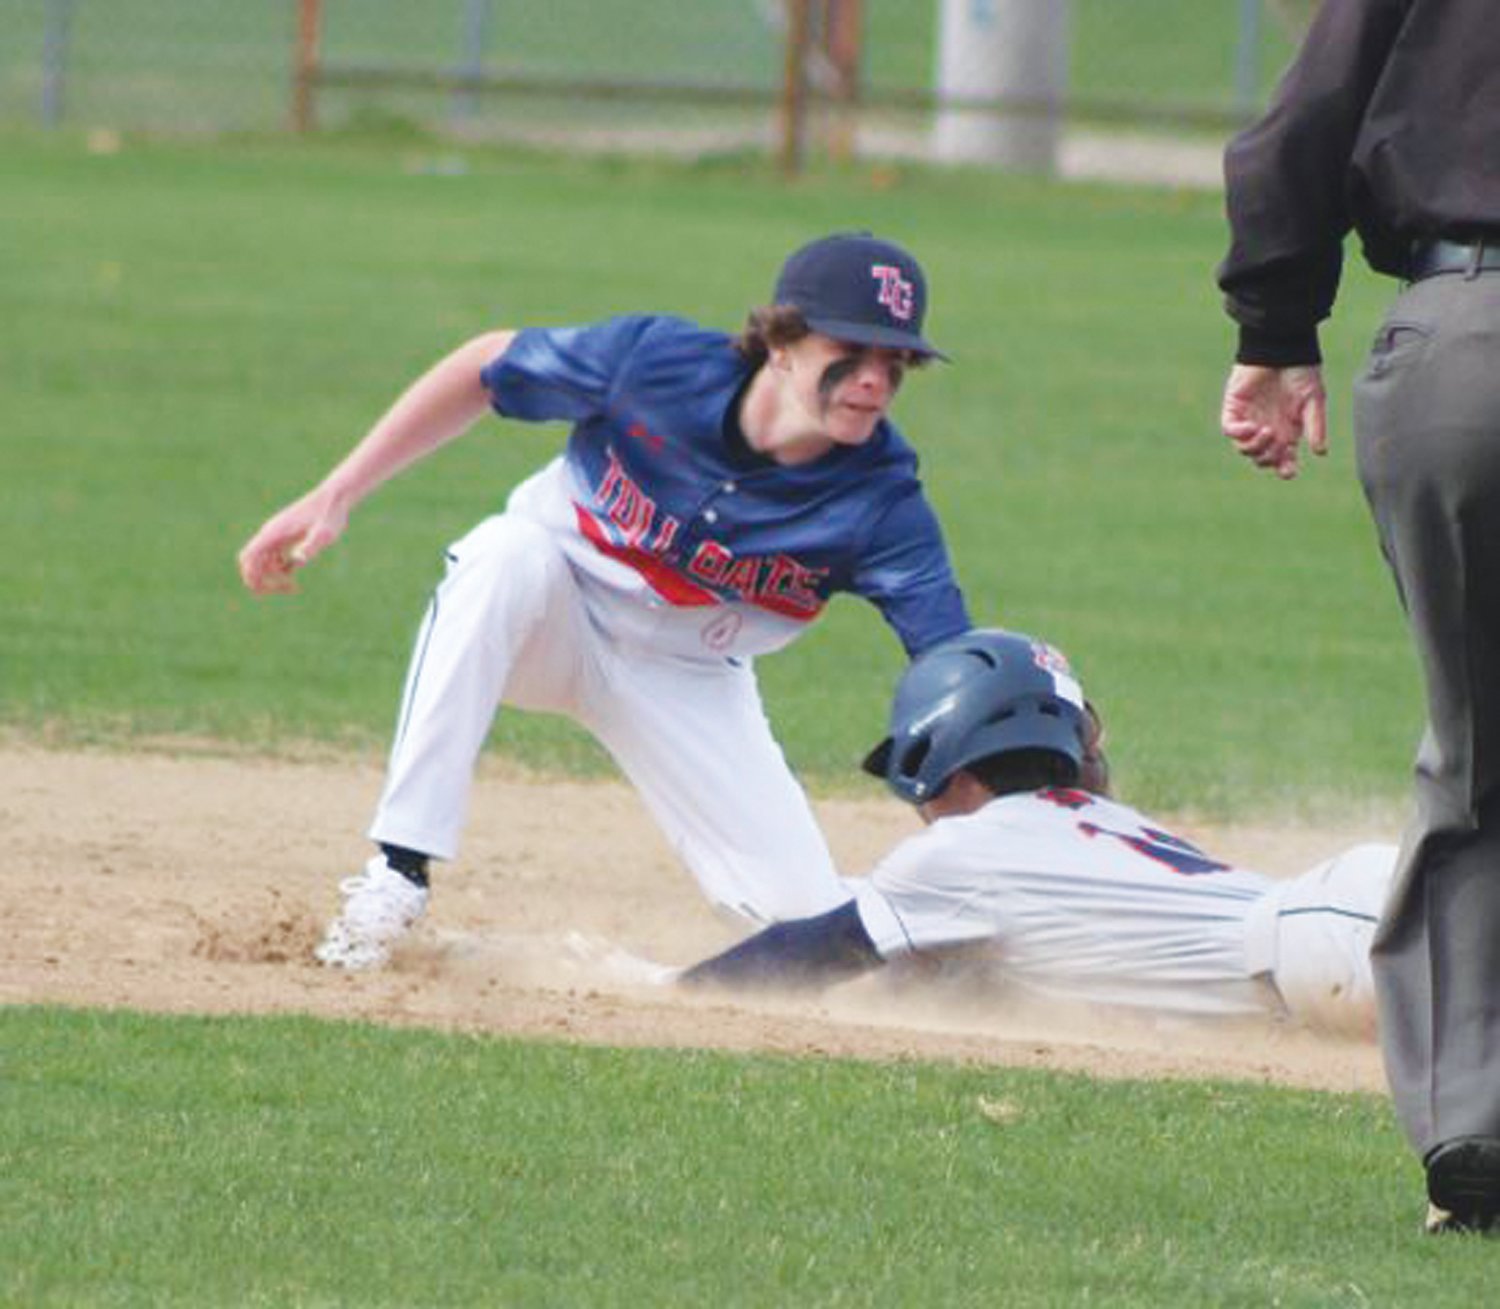 APPLY THE TAG: Zach DeCorpo tags a runner out at second base.